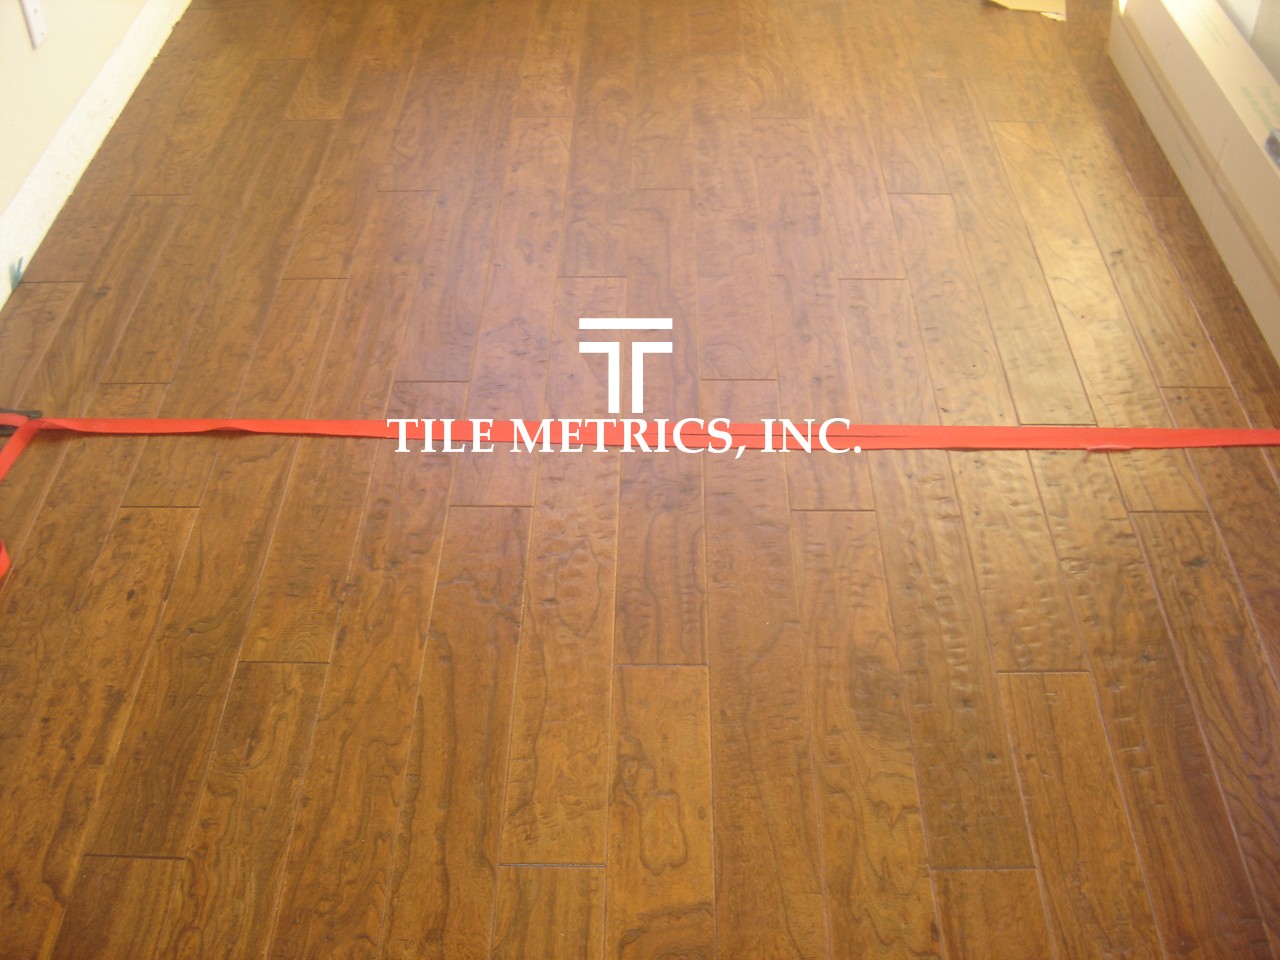 Tile Metrics Inc. - Wood Flooring Contractor, Granite Countertops &  Remodeling Services in Oviedo and Central Florida